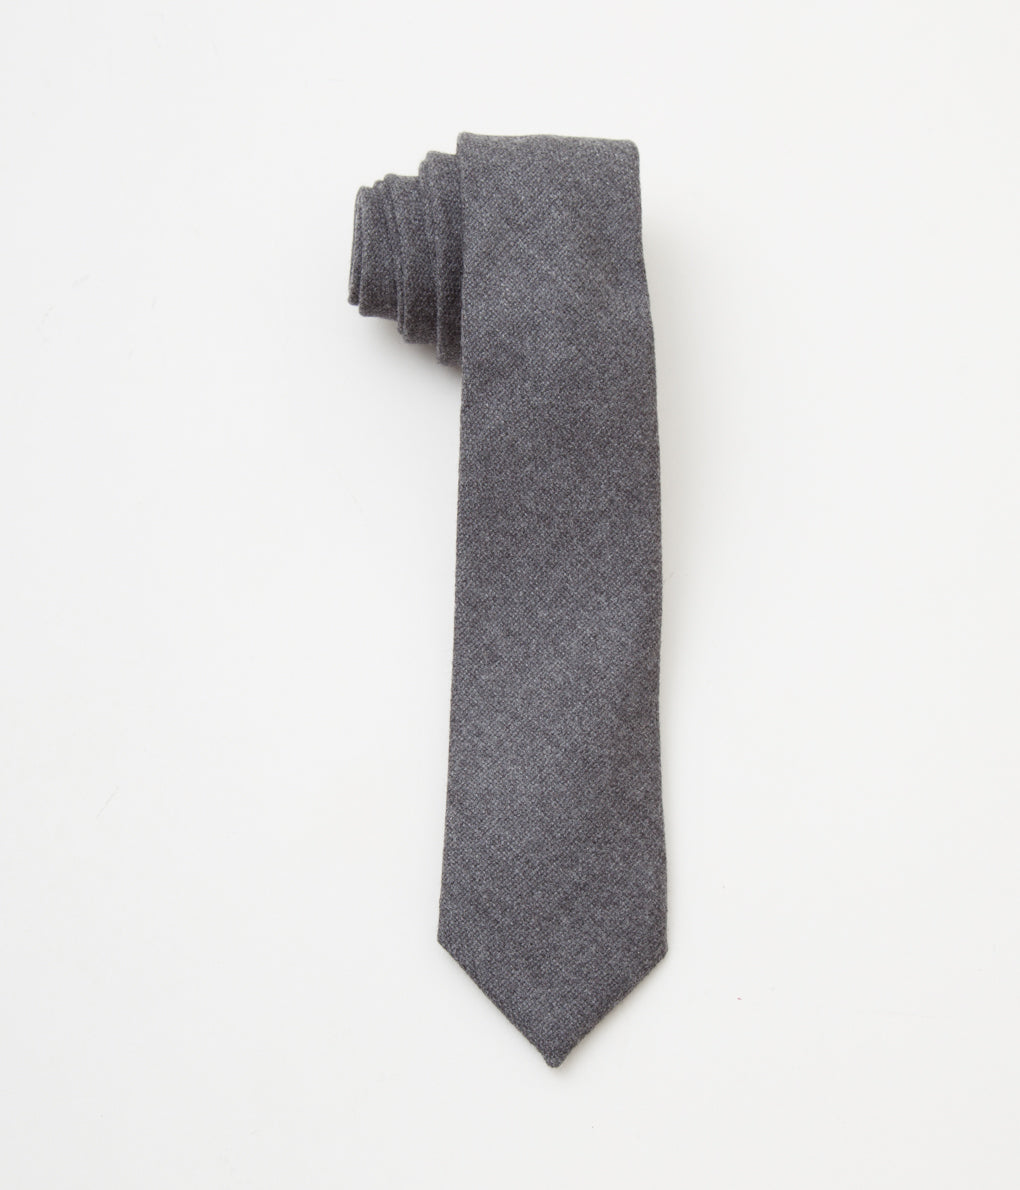 FINE AND DANDY "TIES" (CHARCOAL WOOL)